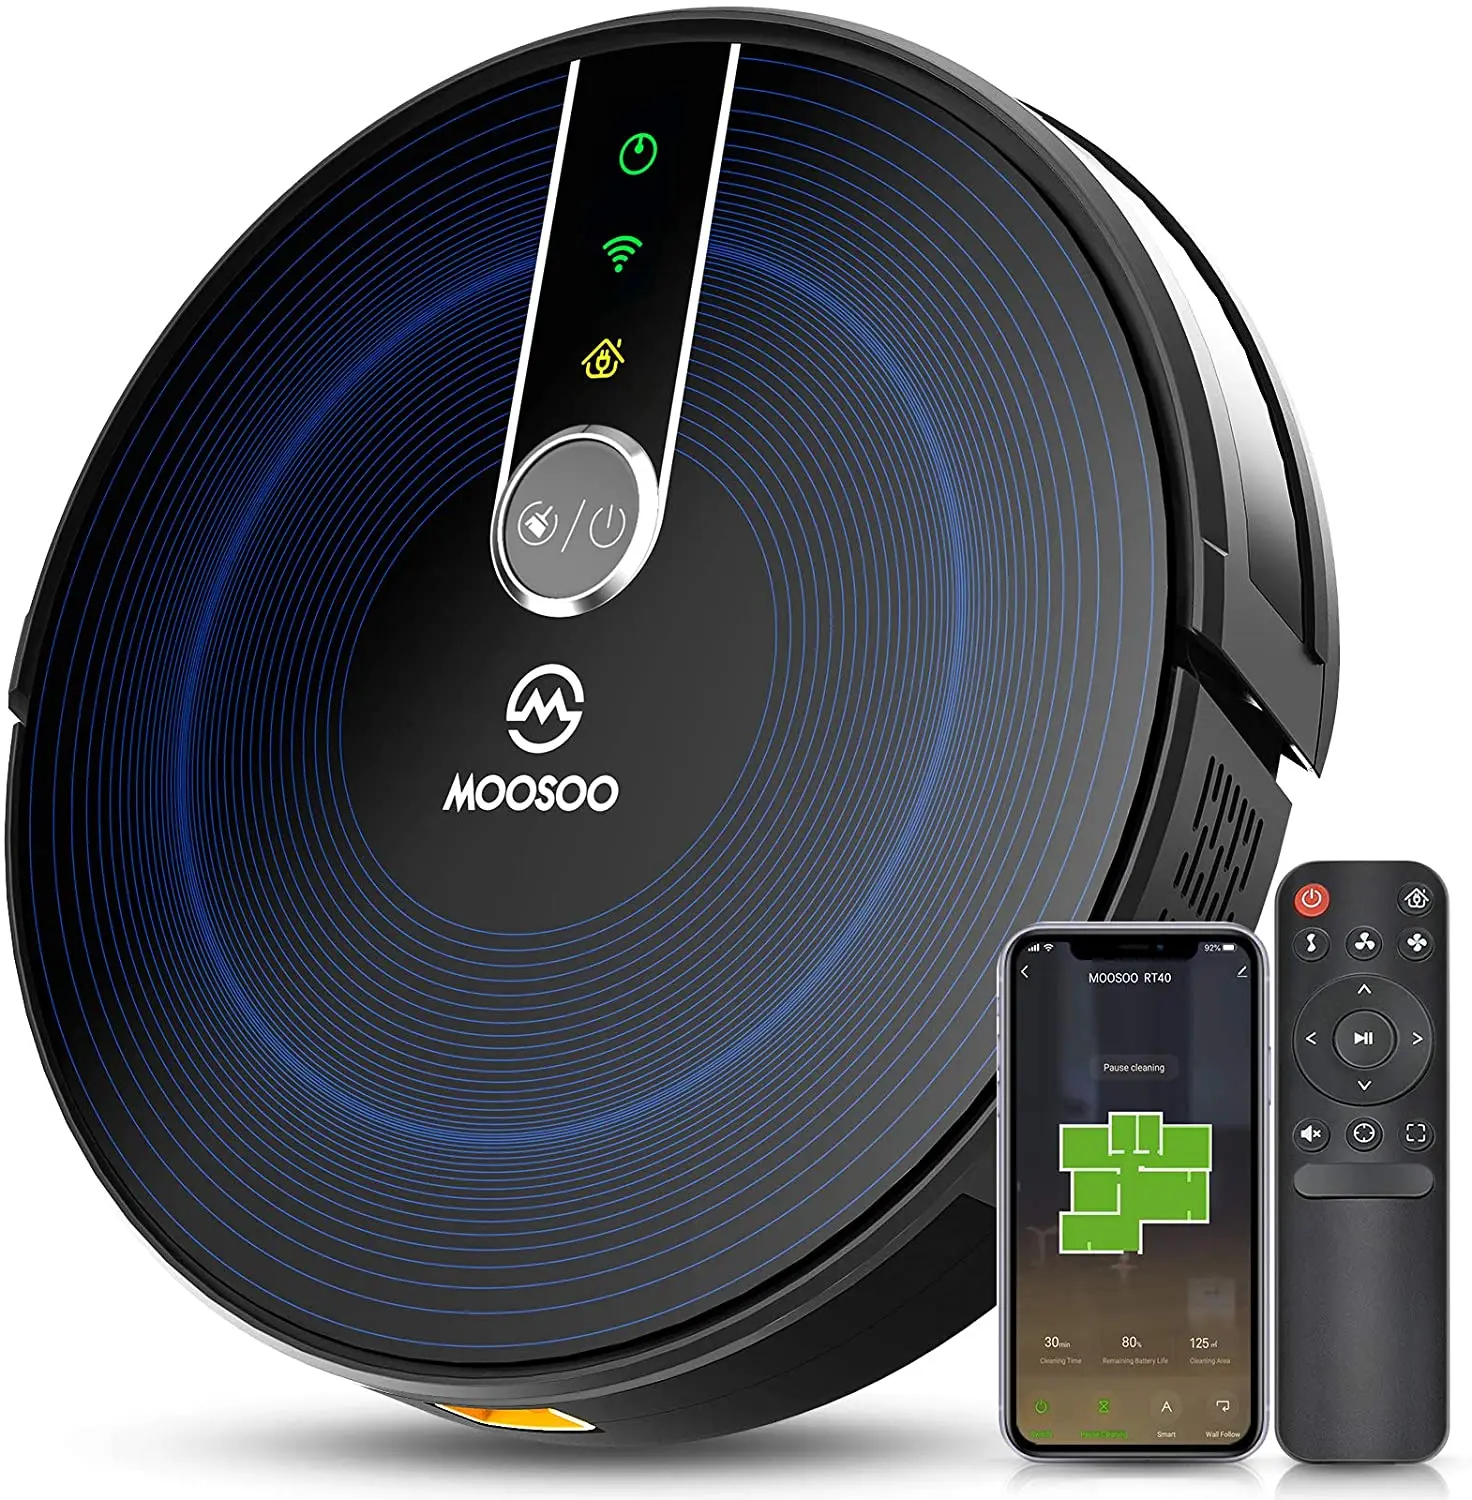 

Robot Vacuum with Mapping Technology Strong Suction Quiet Smart WiFi Robotic Vacuum Cleaner dry for home, Black